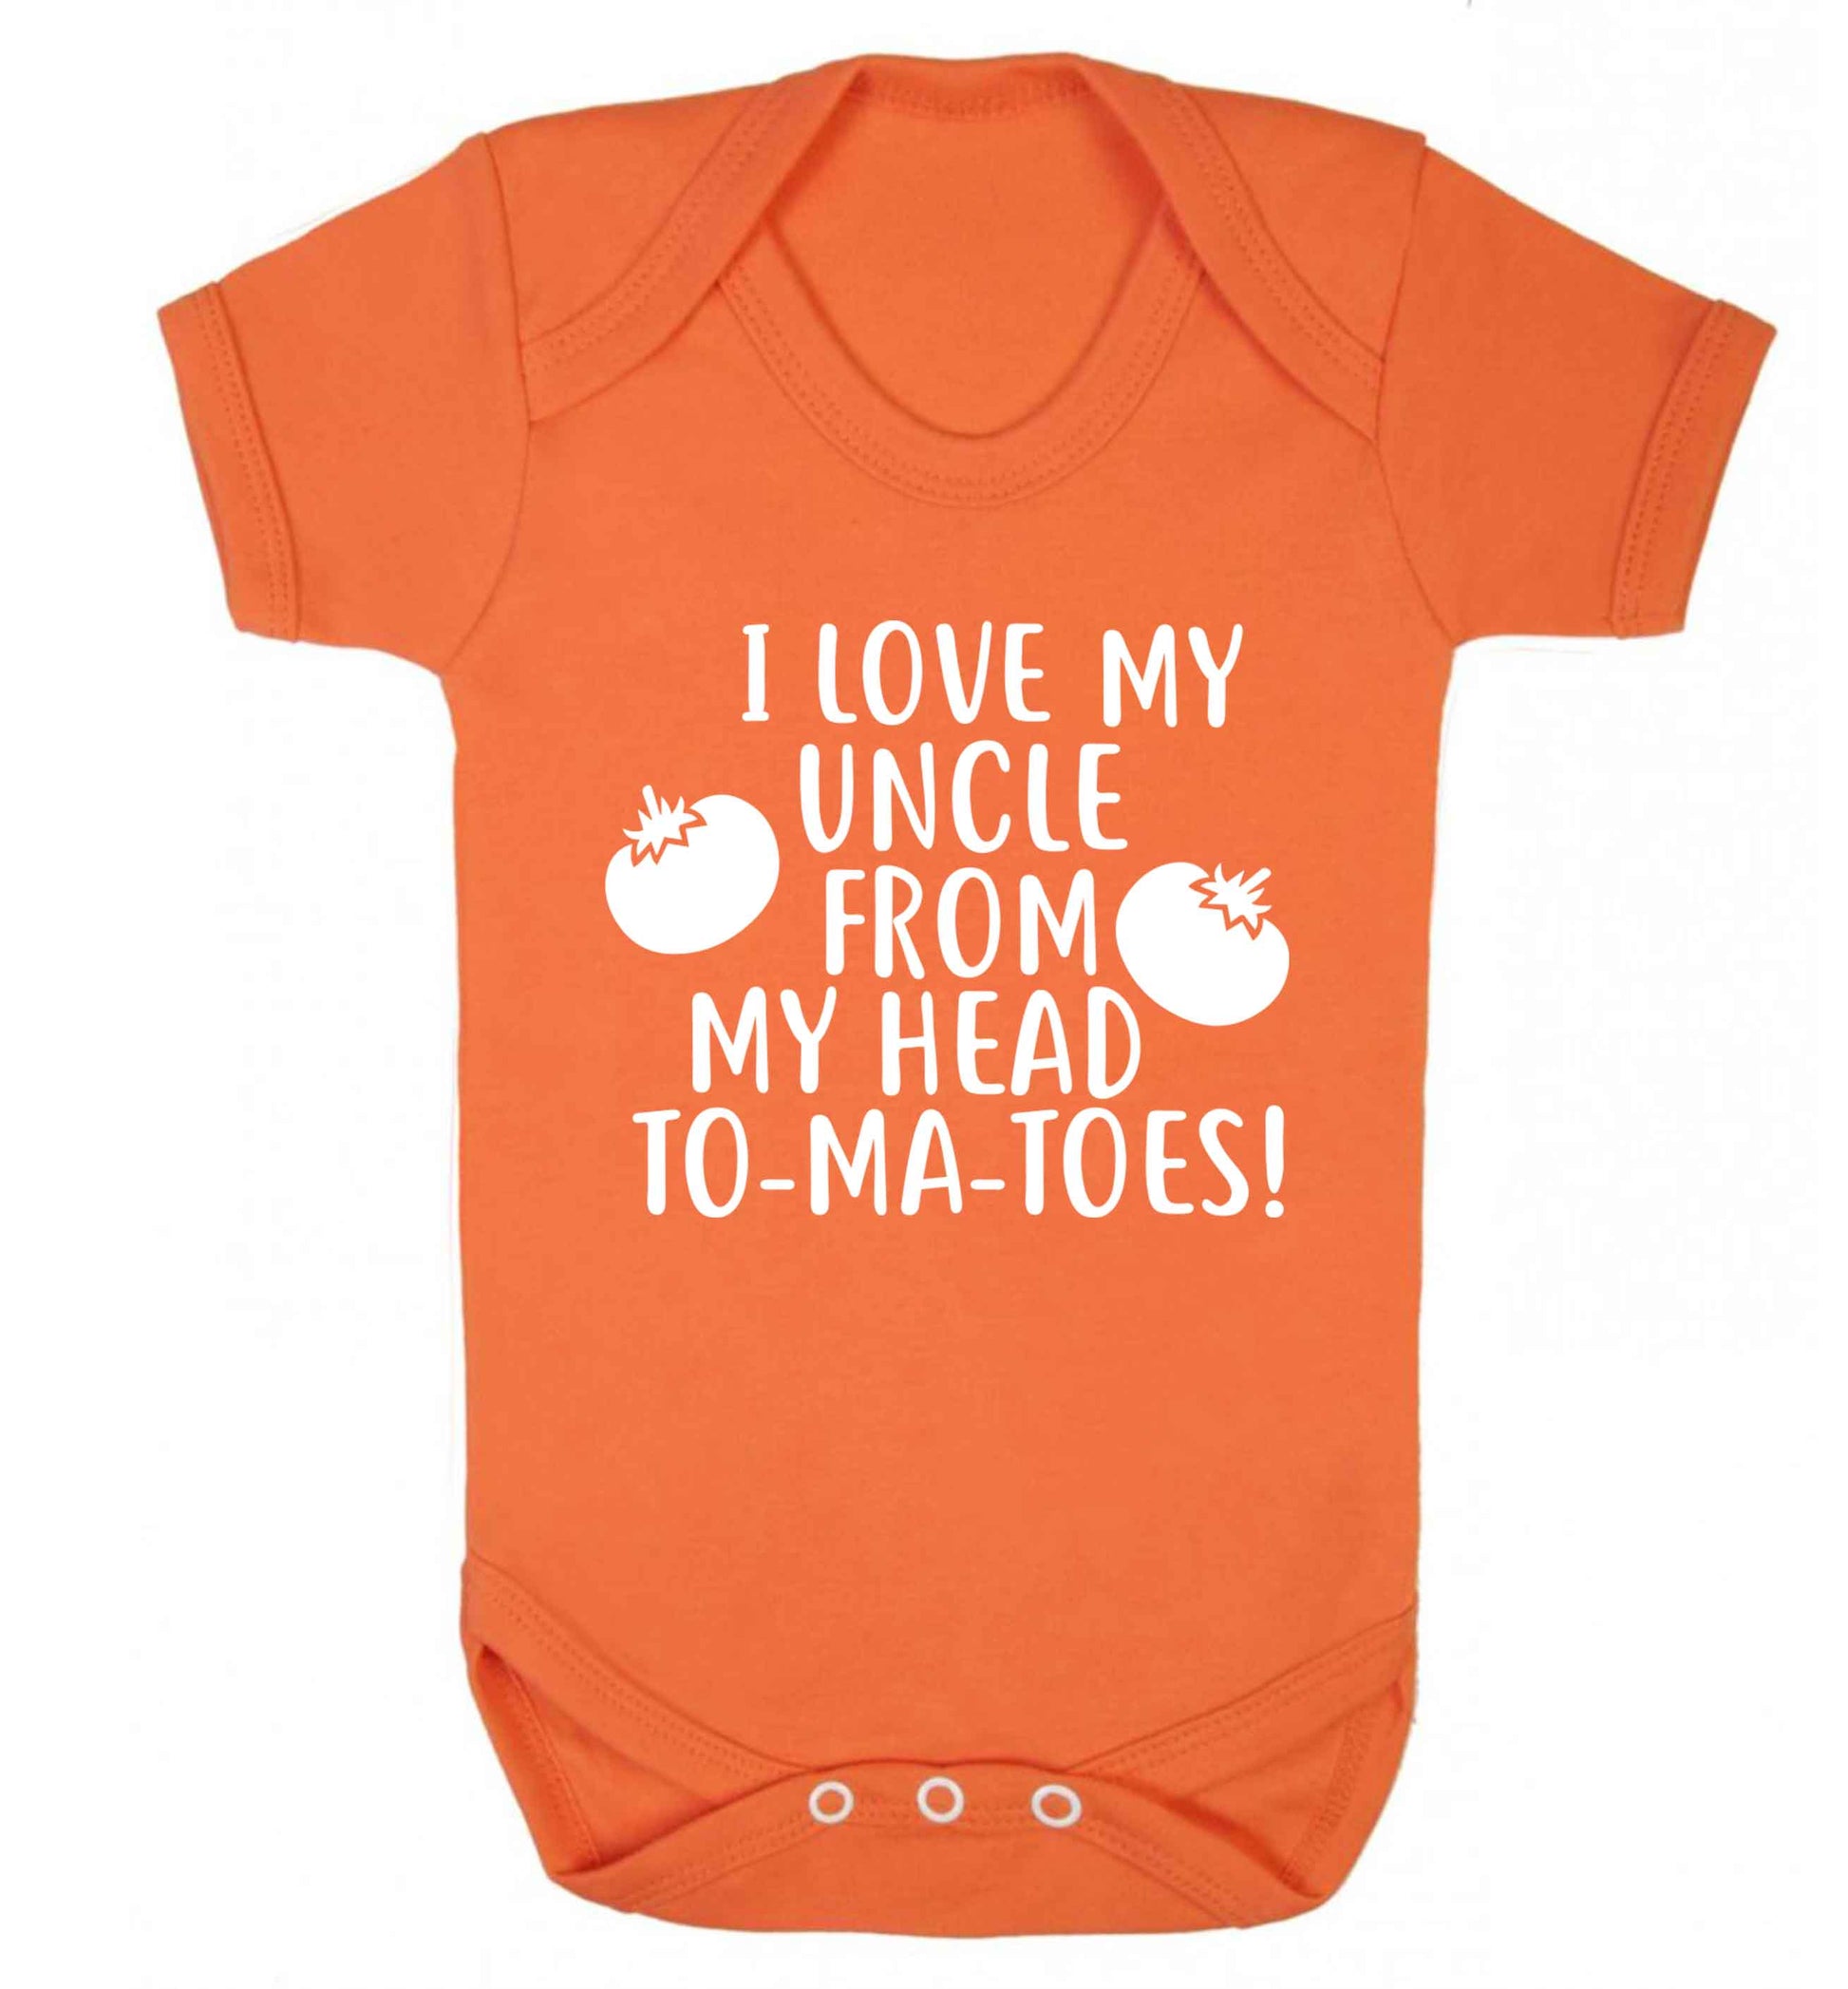 I love my uncle from my head To-Ma-Toes Baby Vest orange 18-24 months